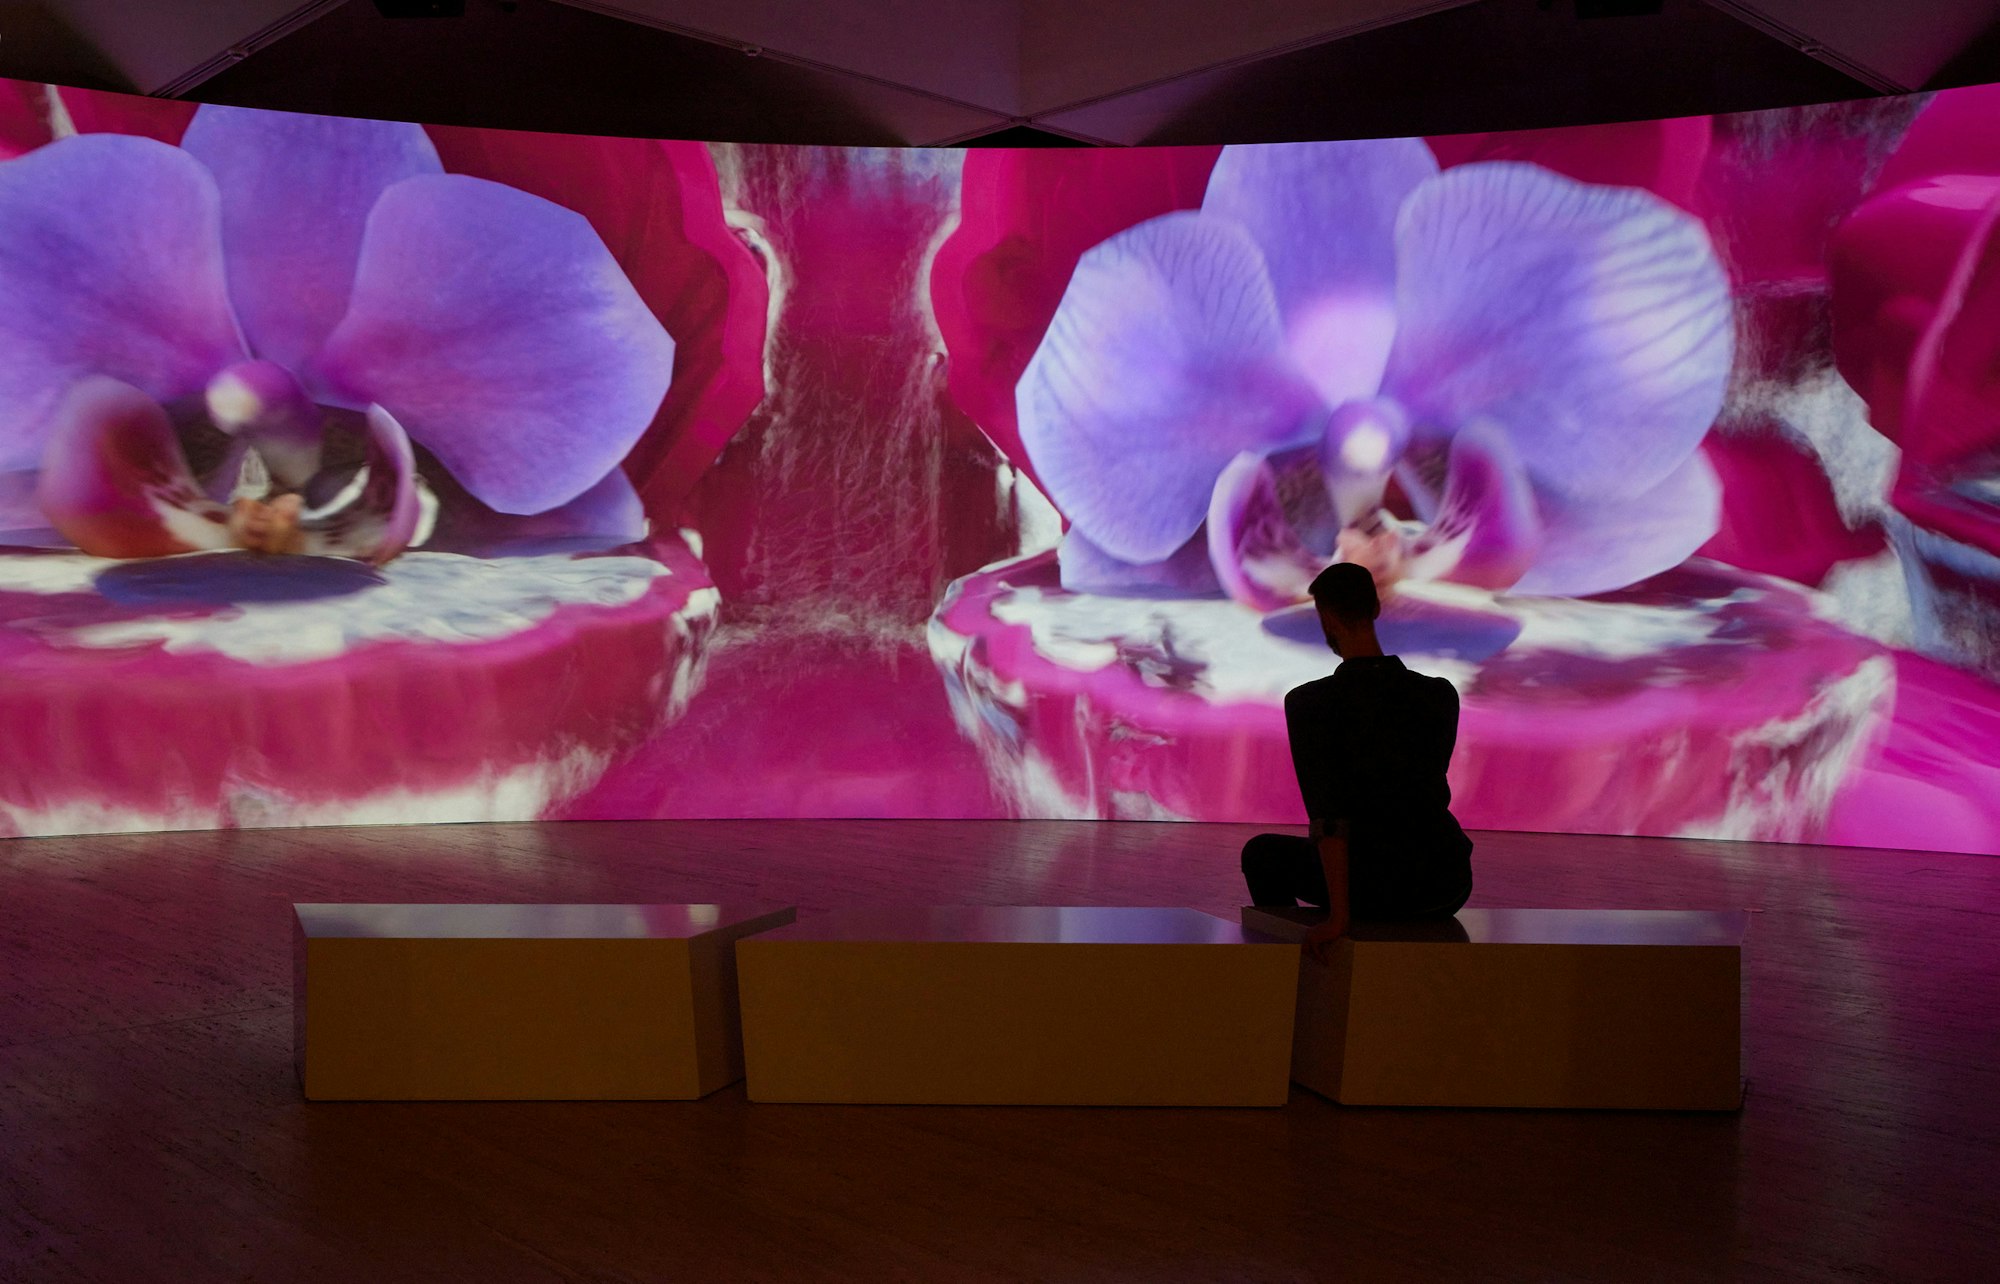 Person sits on a bench in a gallery in front of a large screen showing an artwork featuring large purple flowers and pink clam shells.